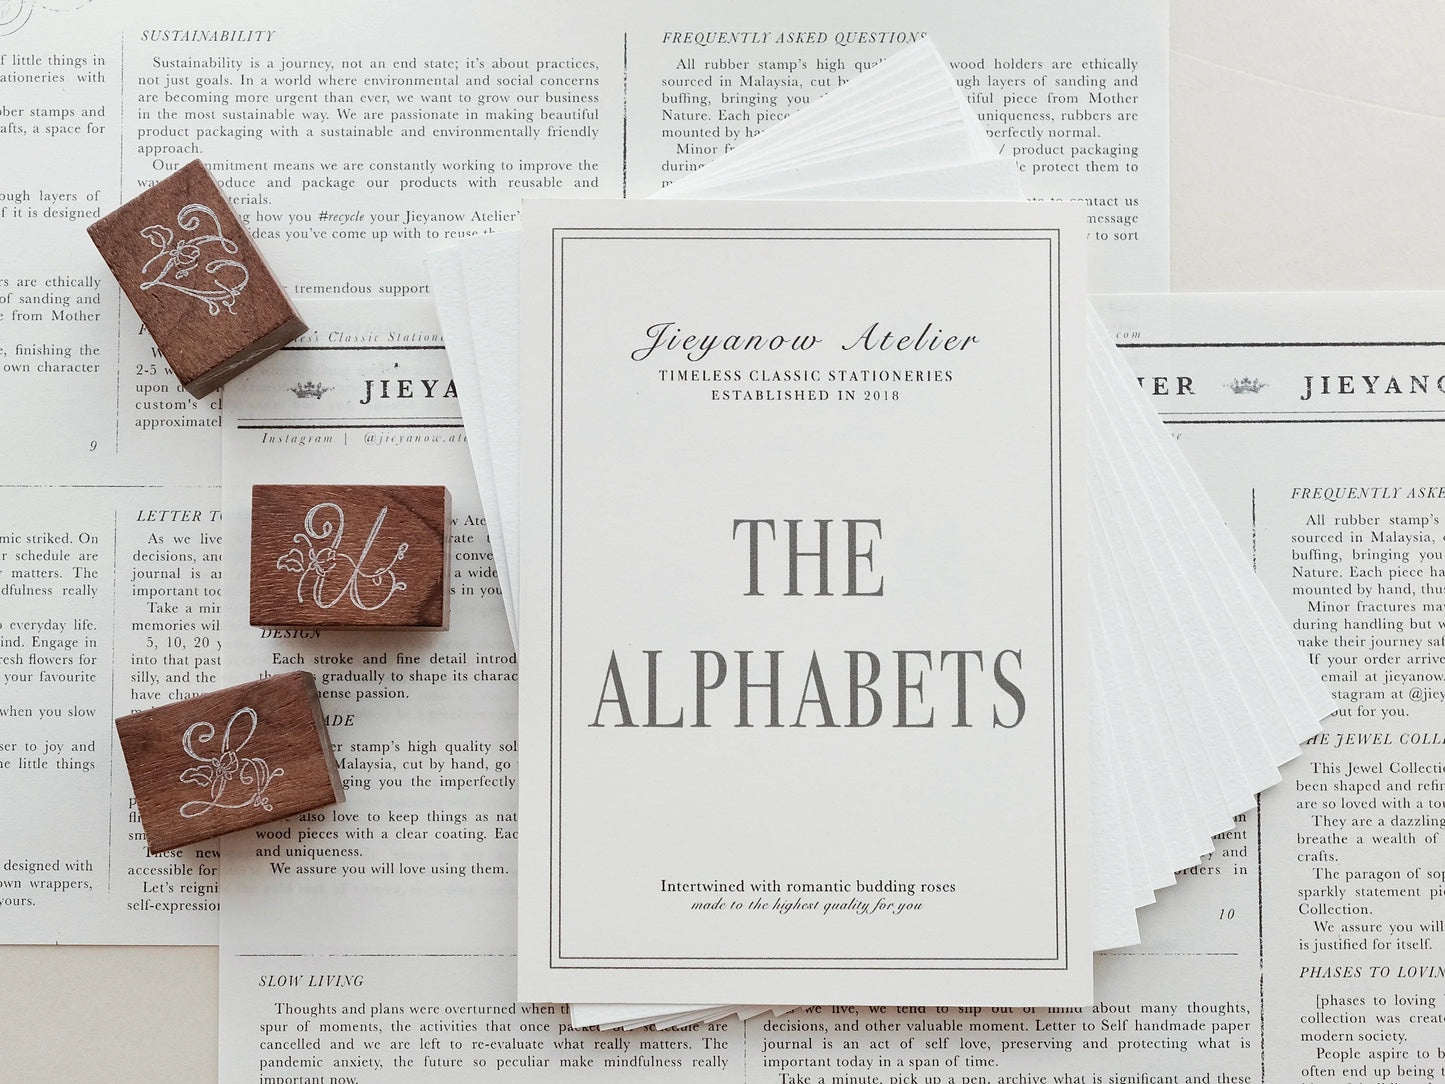 Jieyanow Atelier Rubber Stamp - The Alphabets - Whole Set